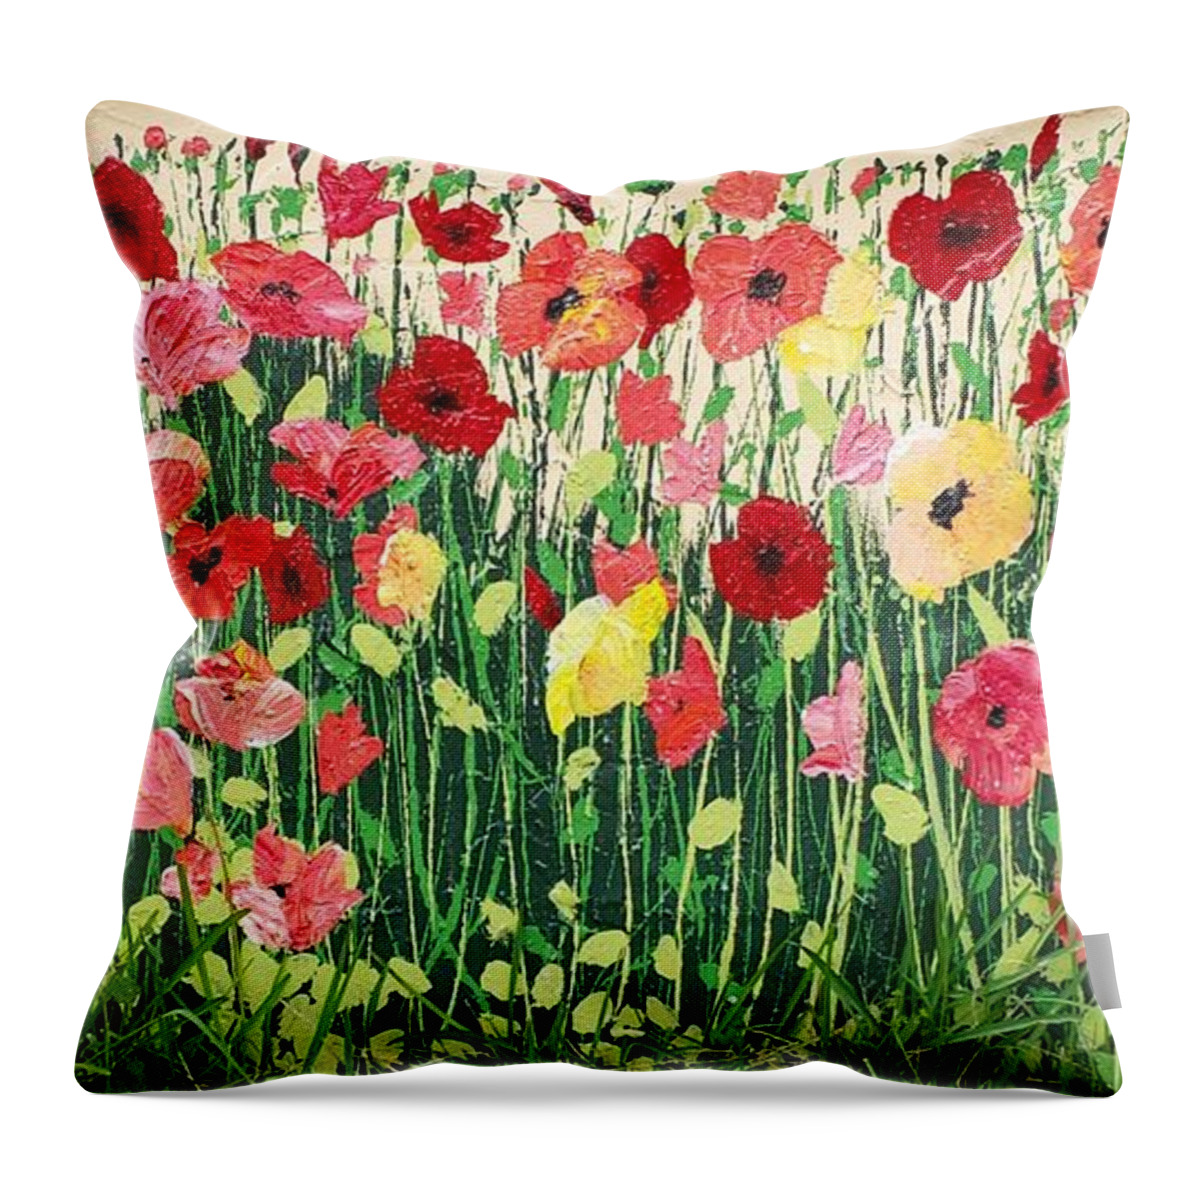 Mural Throw Pillow featuring the painting Poppies mural by Merana Cadorette